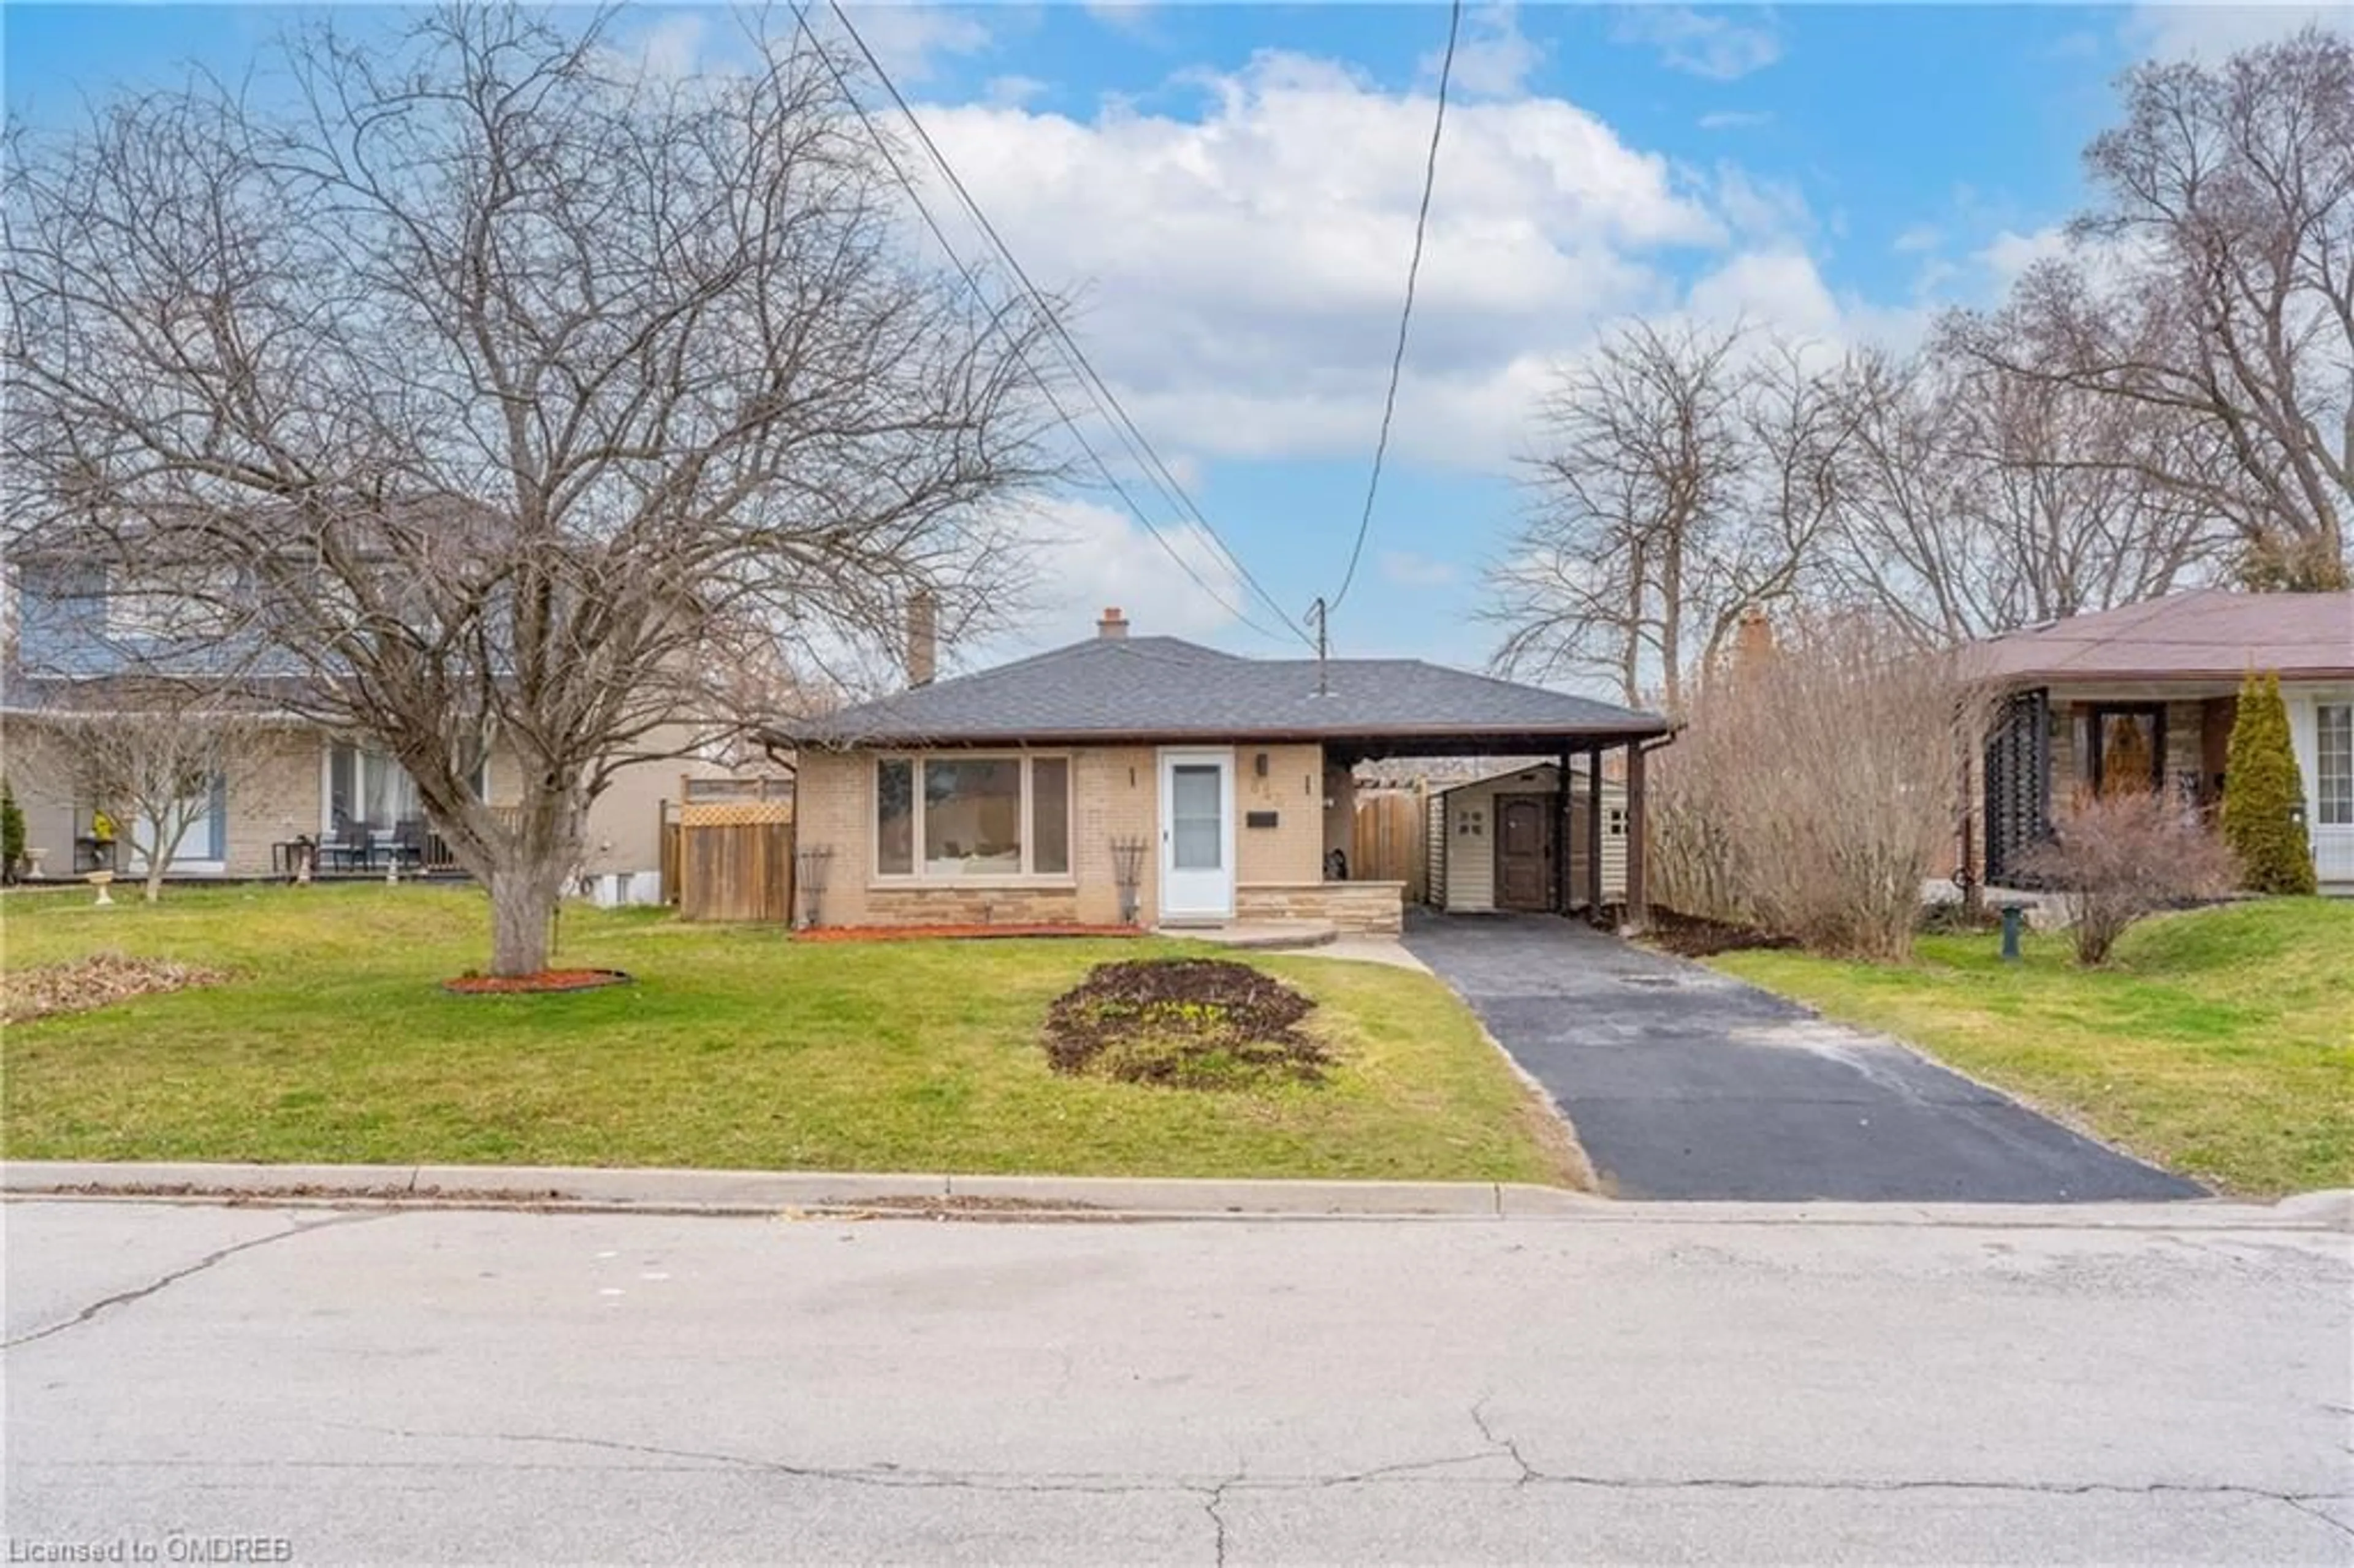 Frontside or backside of a home for 853 Sanok Dr, Pickering Ontario L1W 2R3